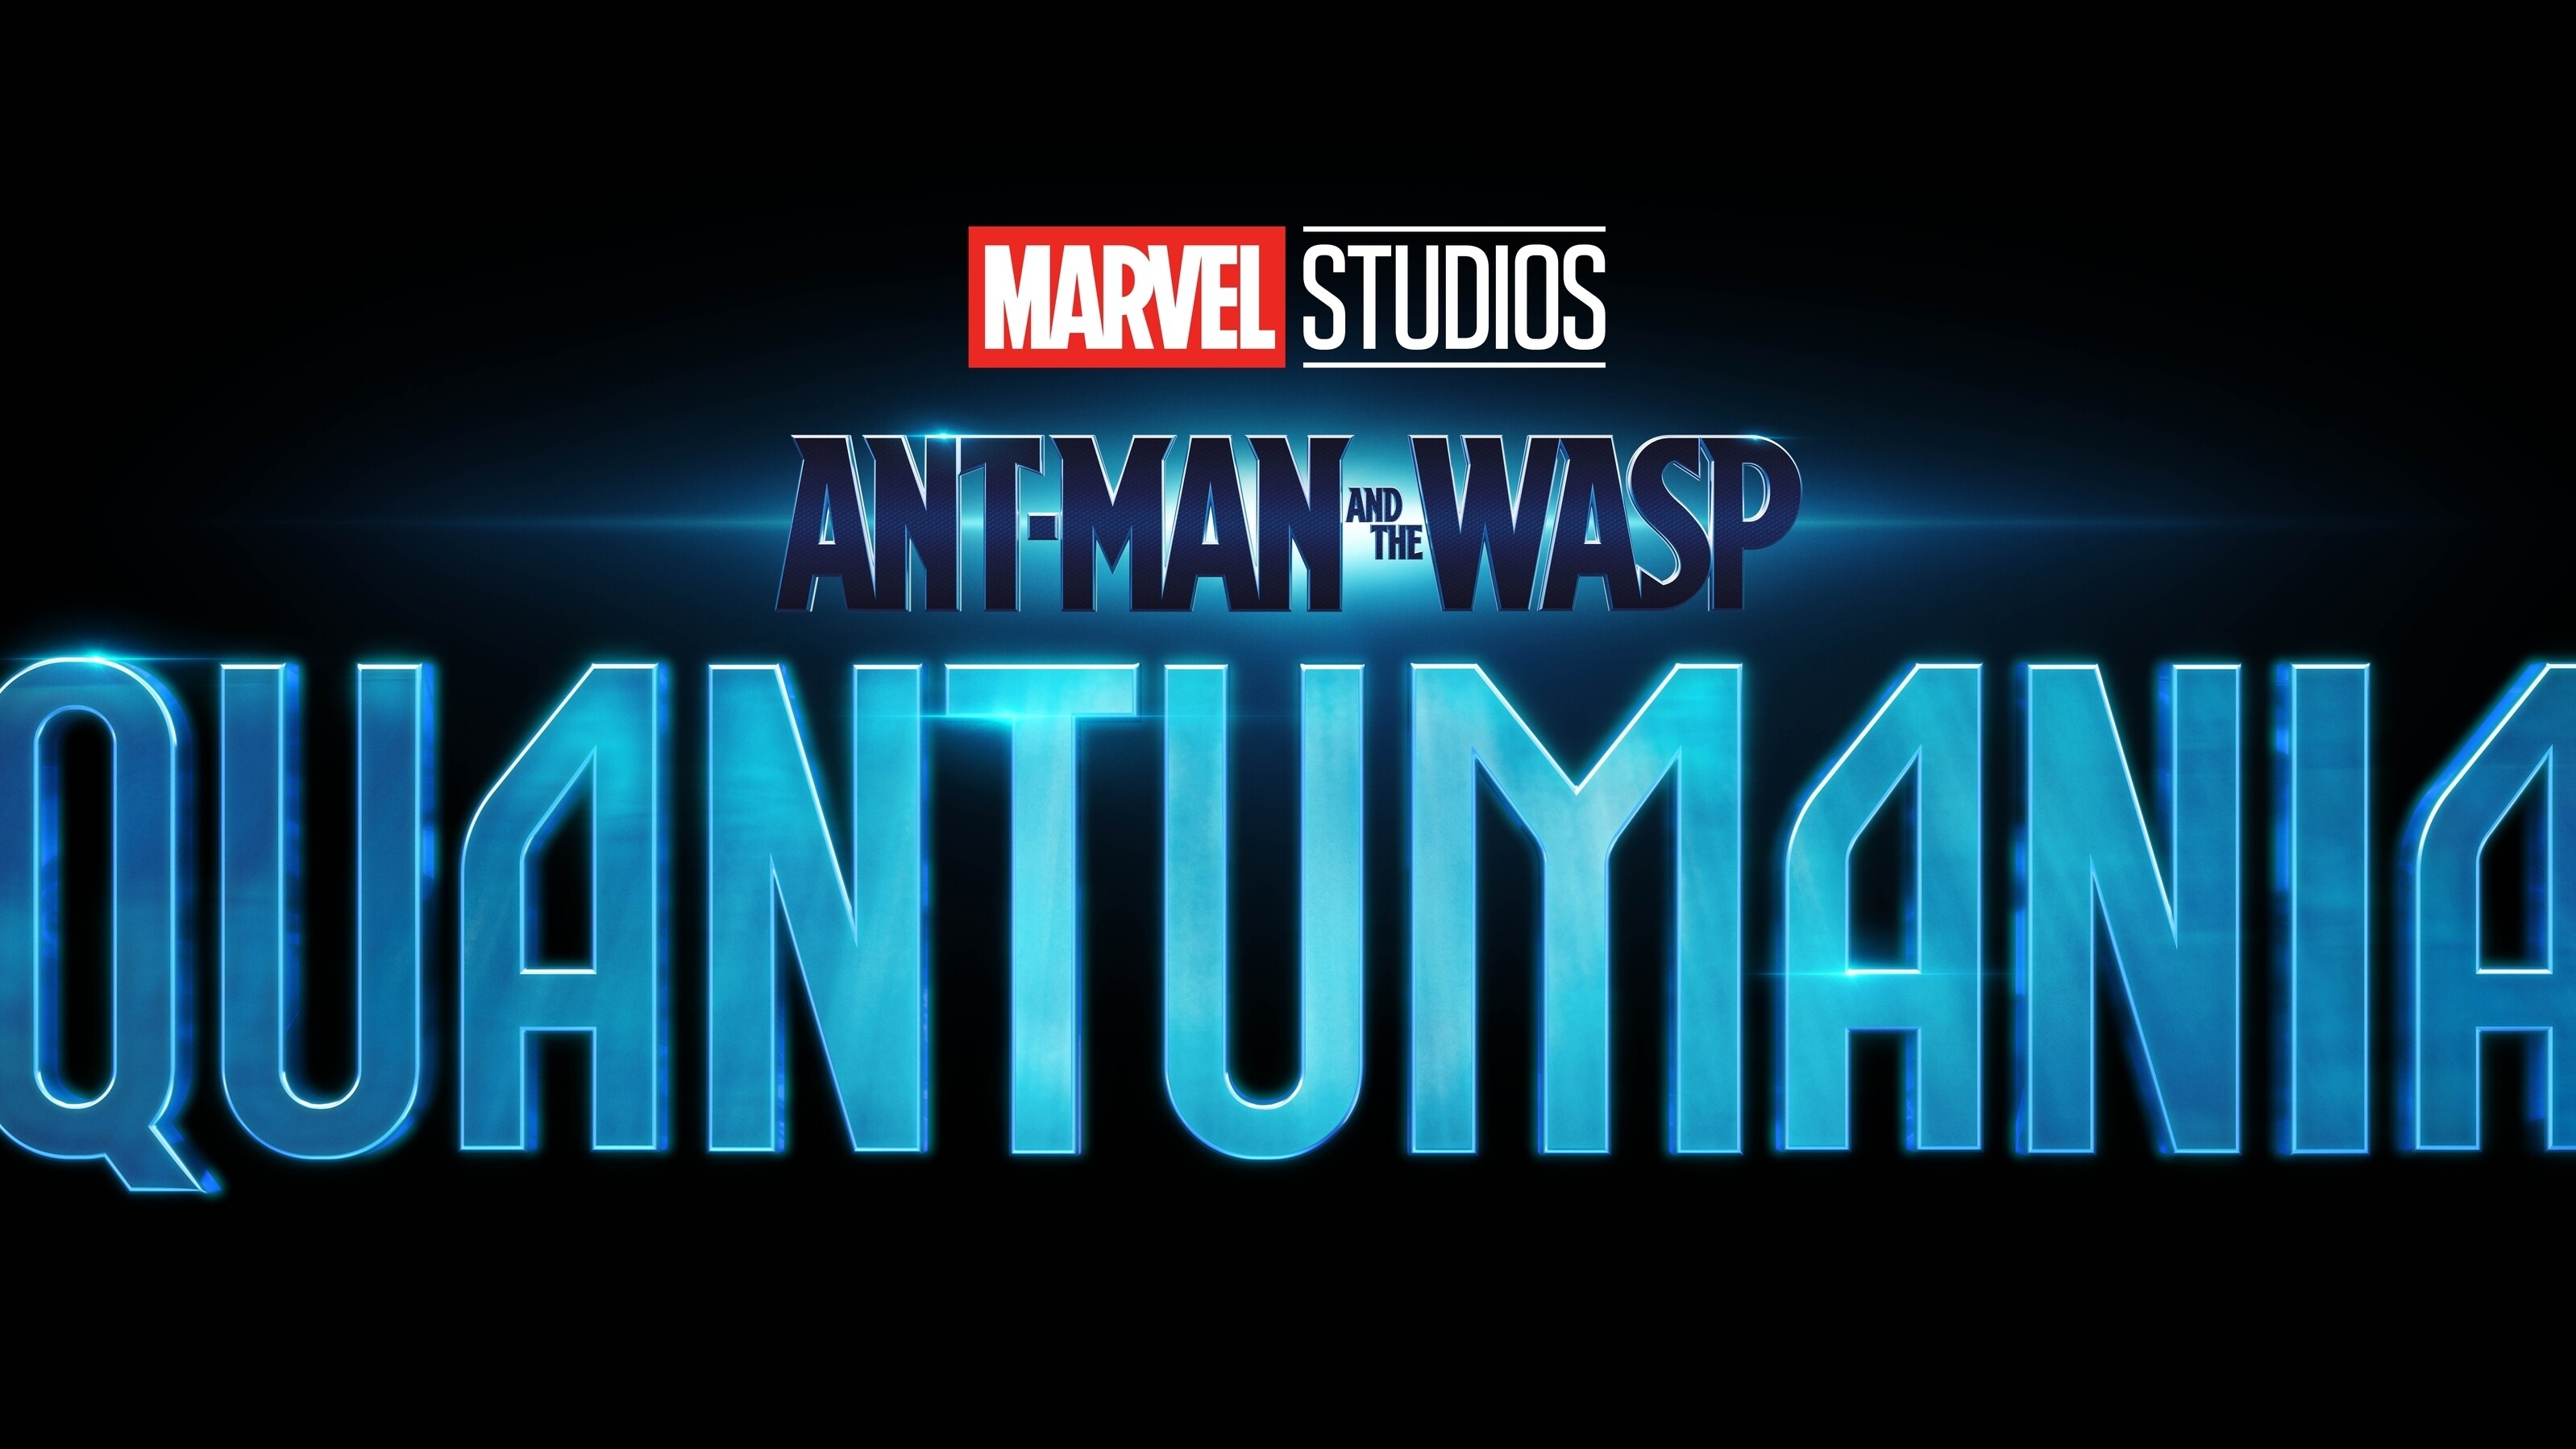 NEW TRAILER DEBUTS FOR MARVEL STUDIOS’ ANT-MAN AND THE WASP: QUANTUMANIA – POSTER & IMAGES NOW AVAILABLE